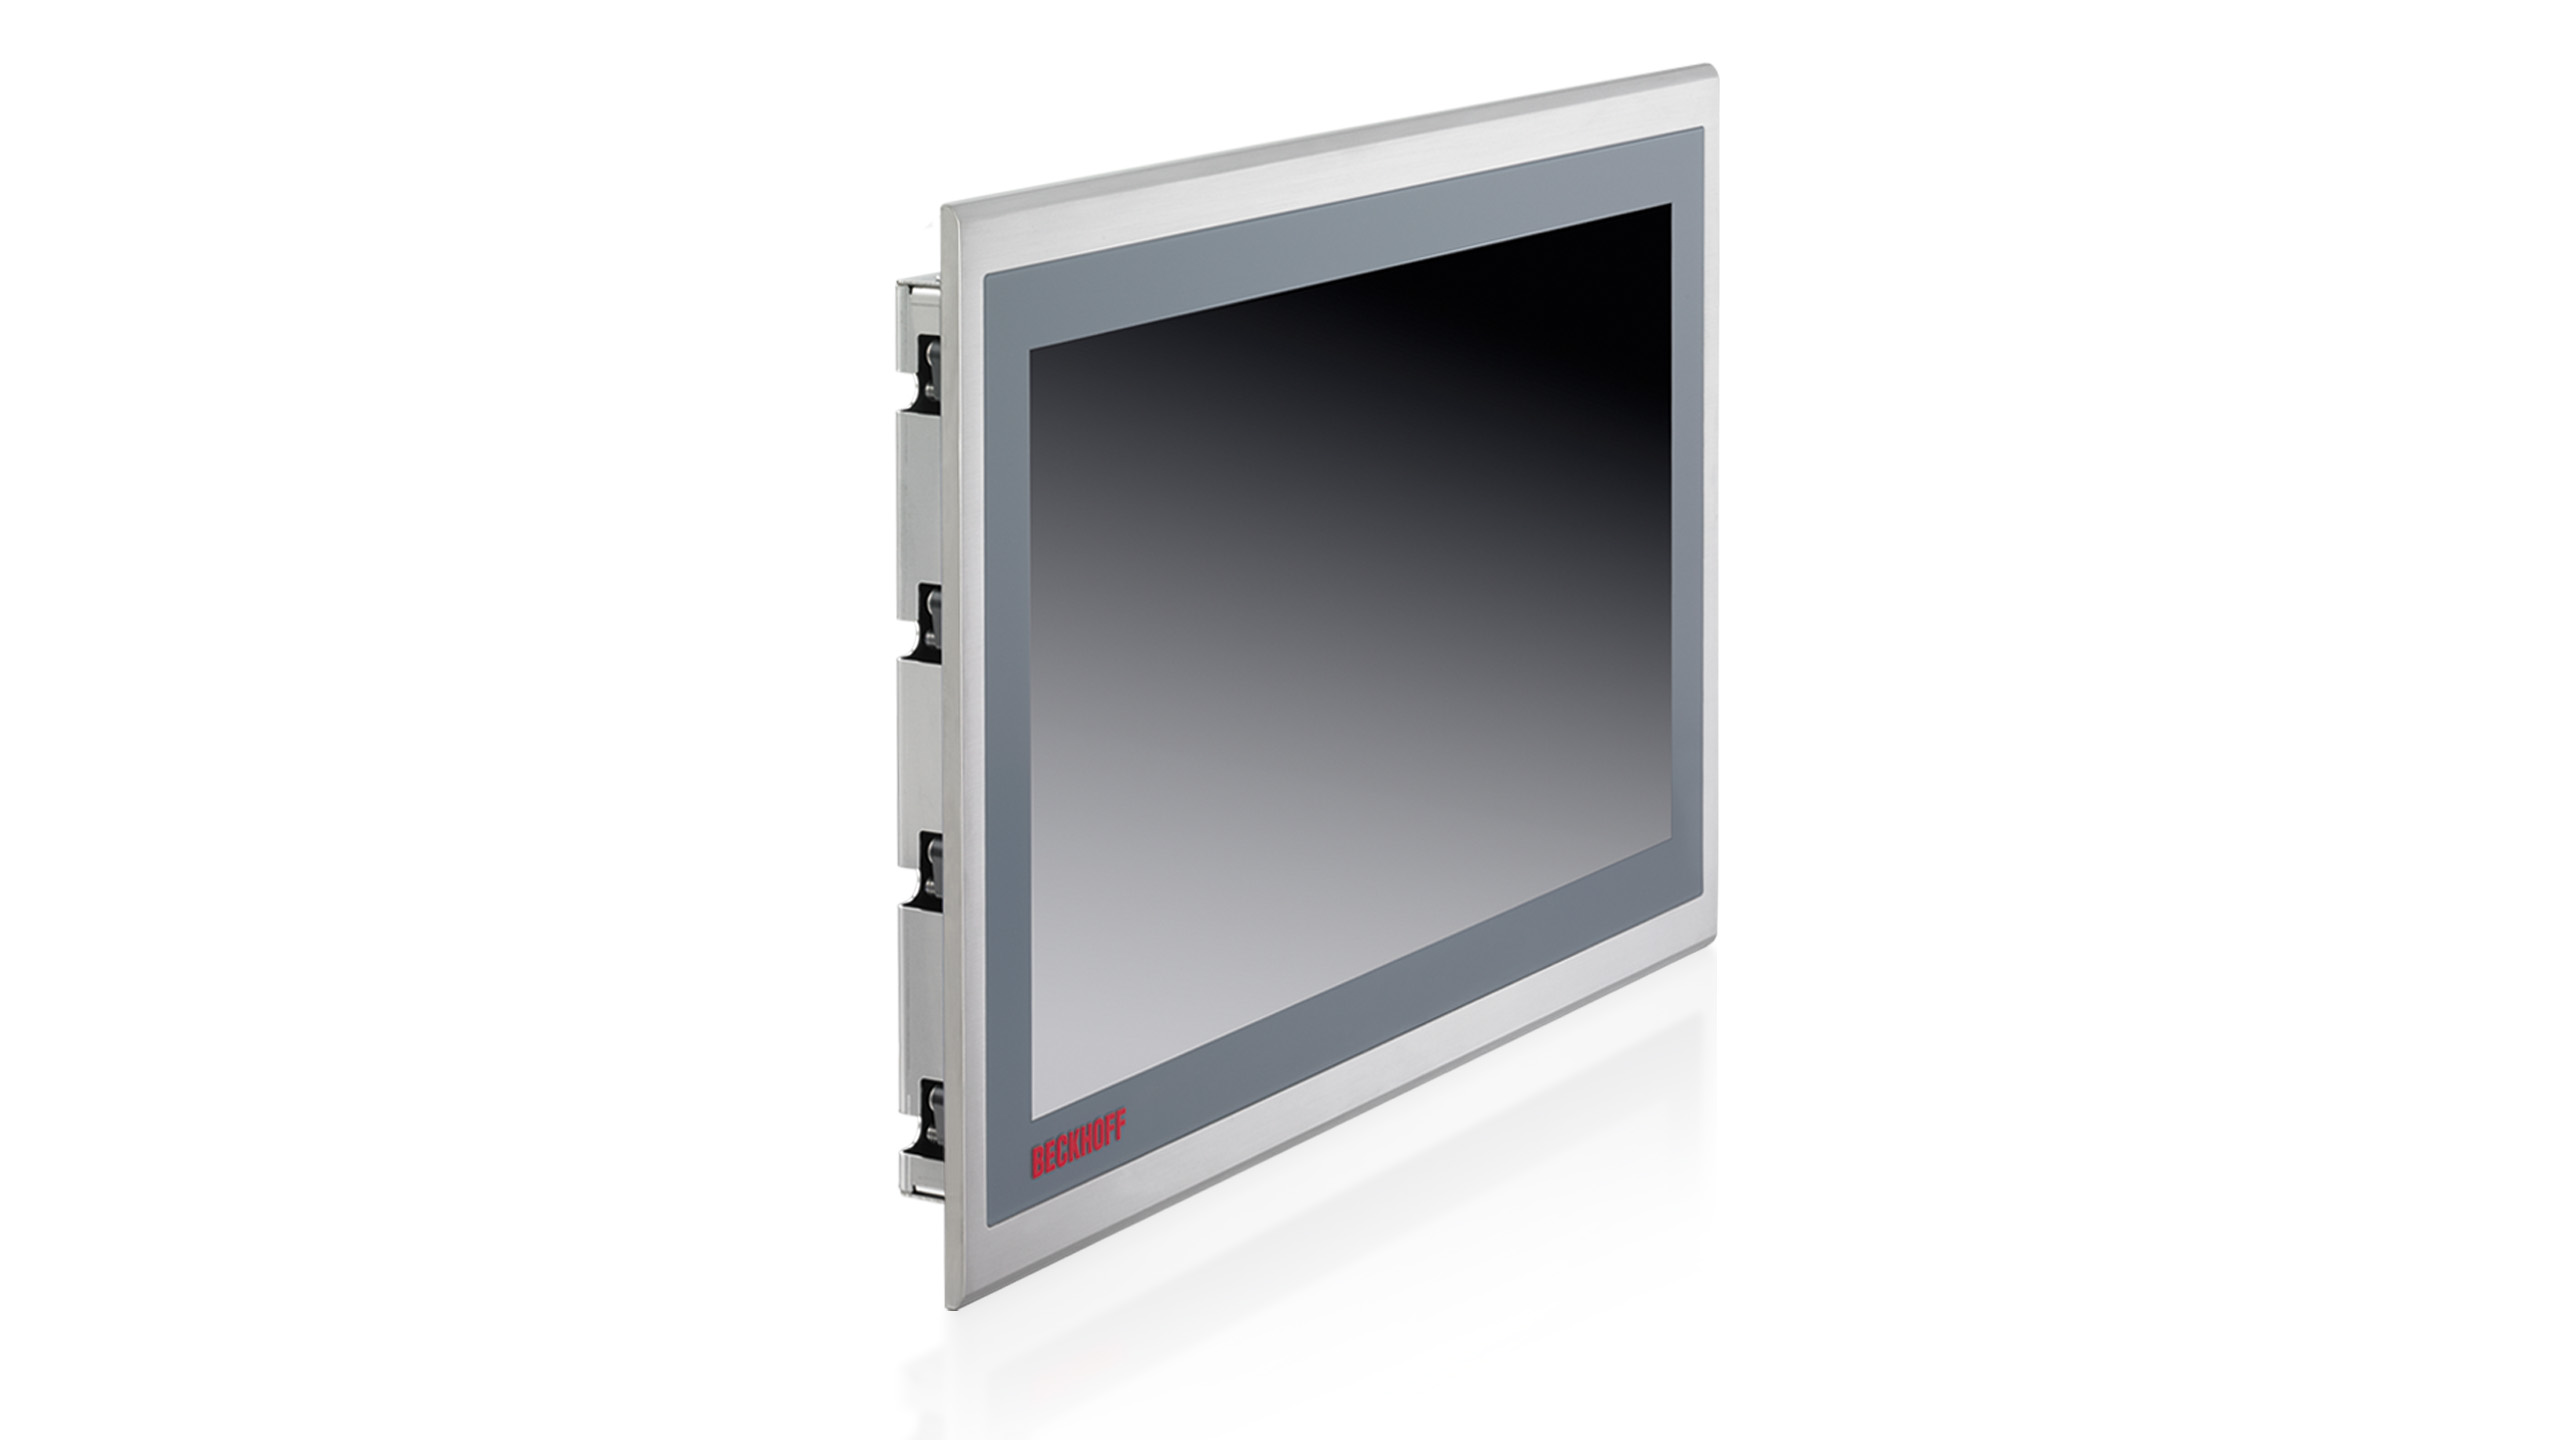 CP27xx | Fanless multi-touch built-in Panel PC